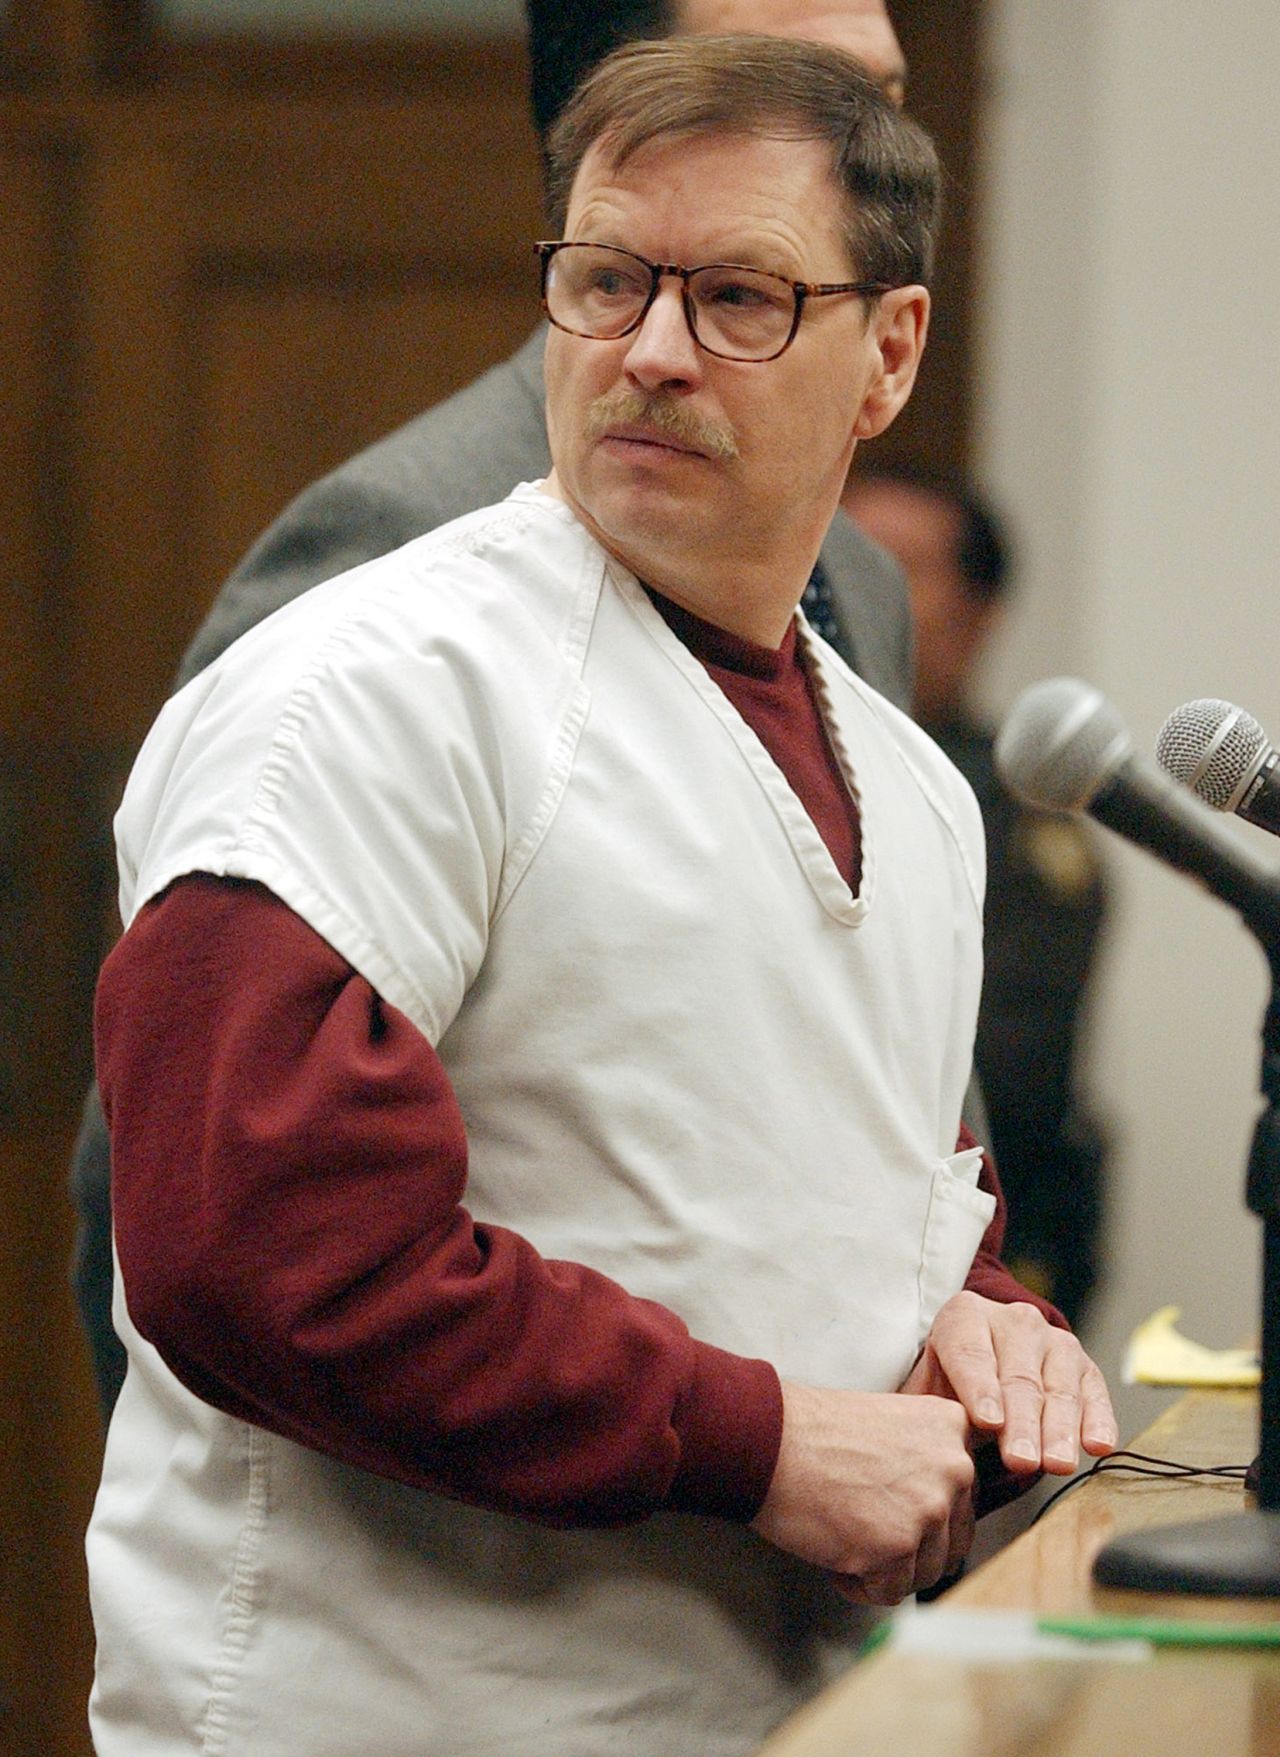 Gary Leon Ridgway, also known as the Green River Killer, confessed to 48 killings after his DNA was linked to a few of his victims. Remains of his victims, mostly runaways and prostitutes, turned up in ravines, rivers, airports and freeways in the Pacific Northwest.